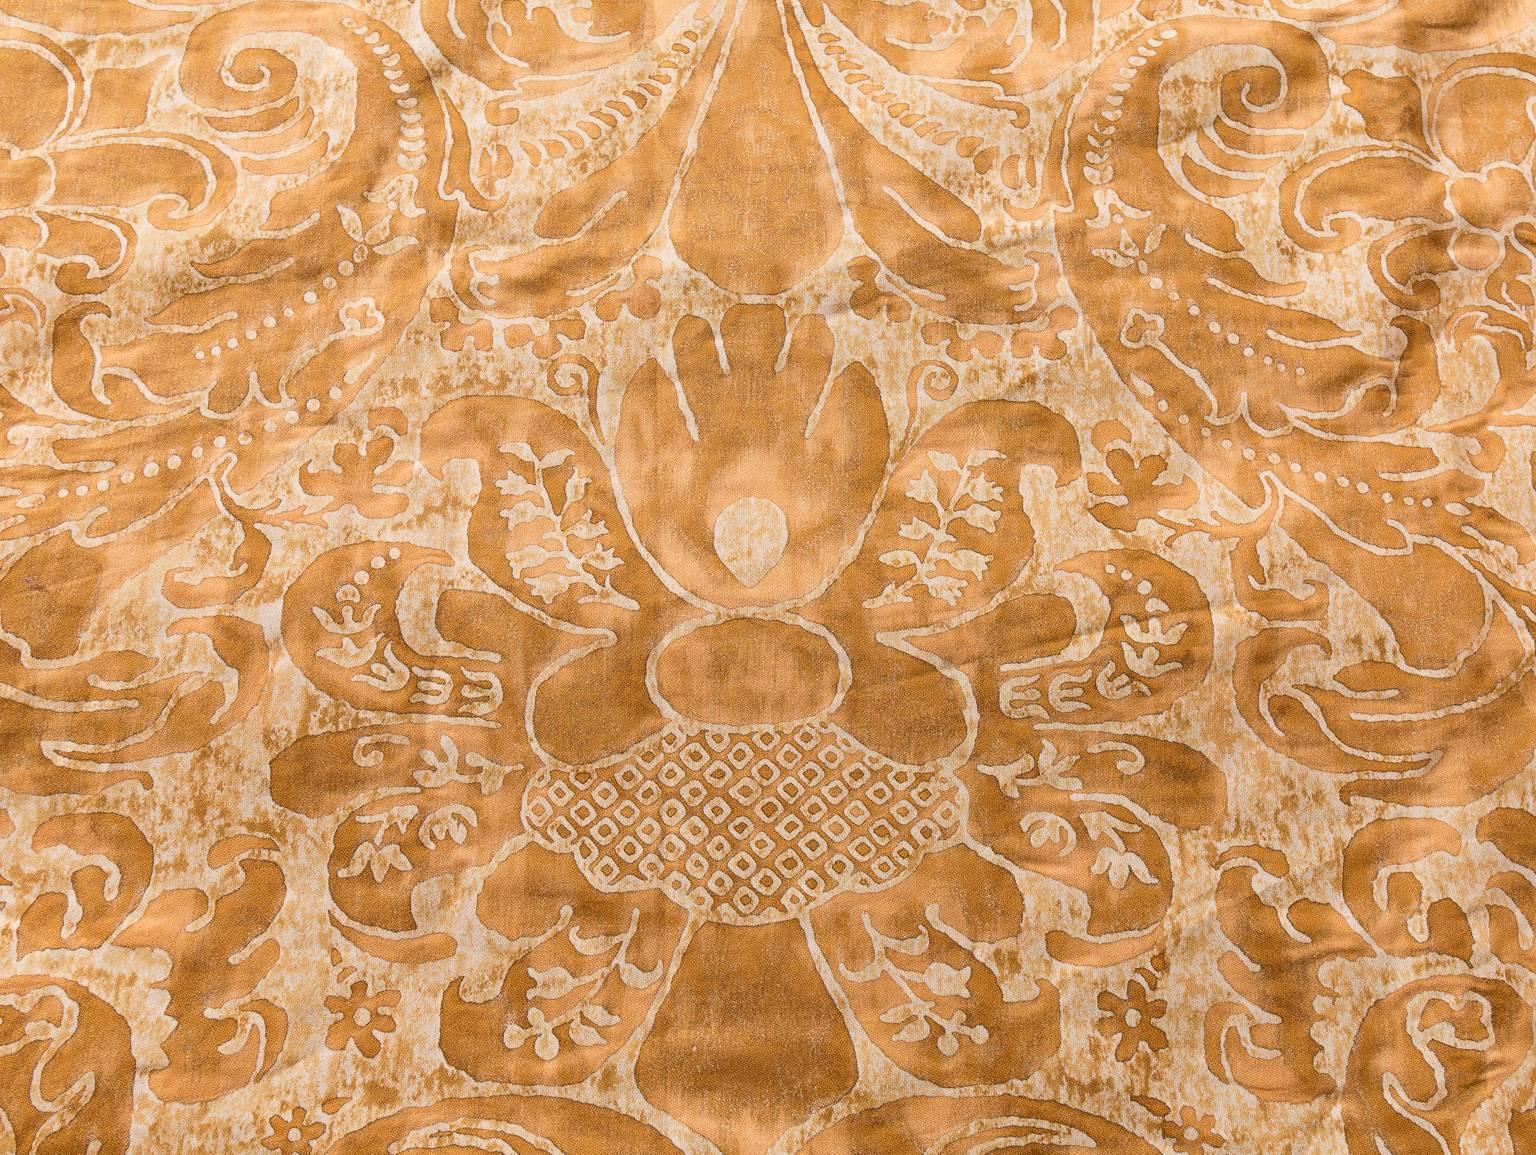 Lucious Fortuni fabric in a king-size spread. True shiny gold and white silk and cotton fabrics, Babarizi pattern. Purchased from Palm Beach first owner afraid to sit on the bedspread. Like new. I would say, 